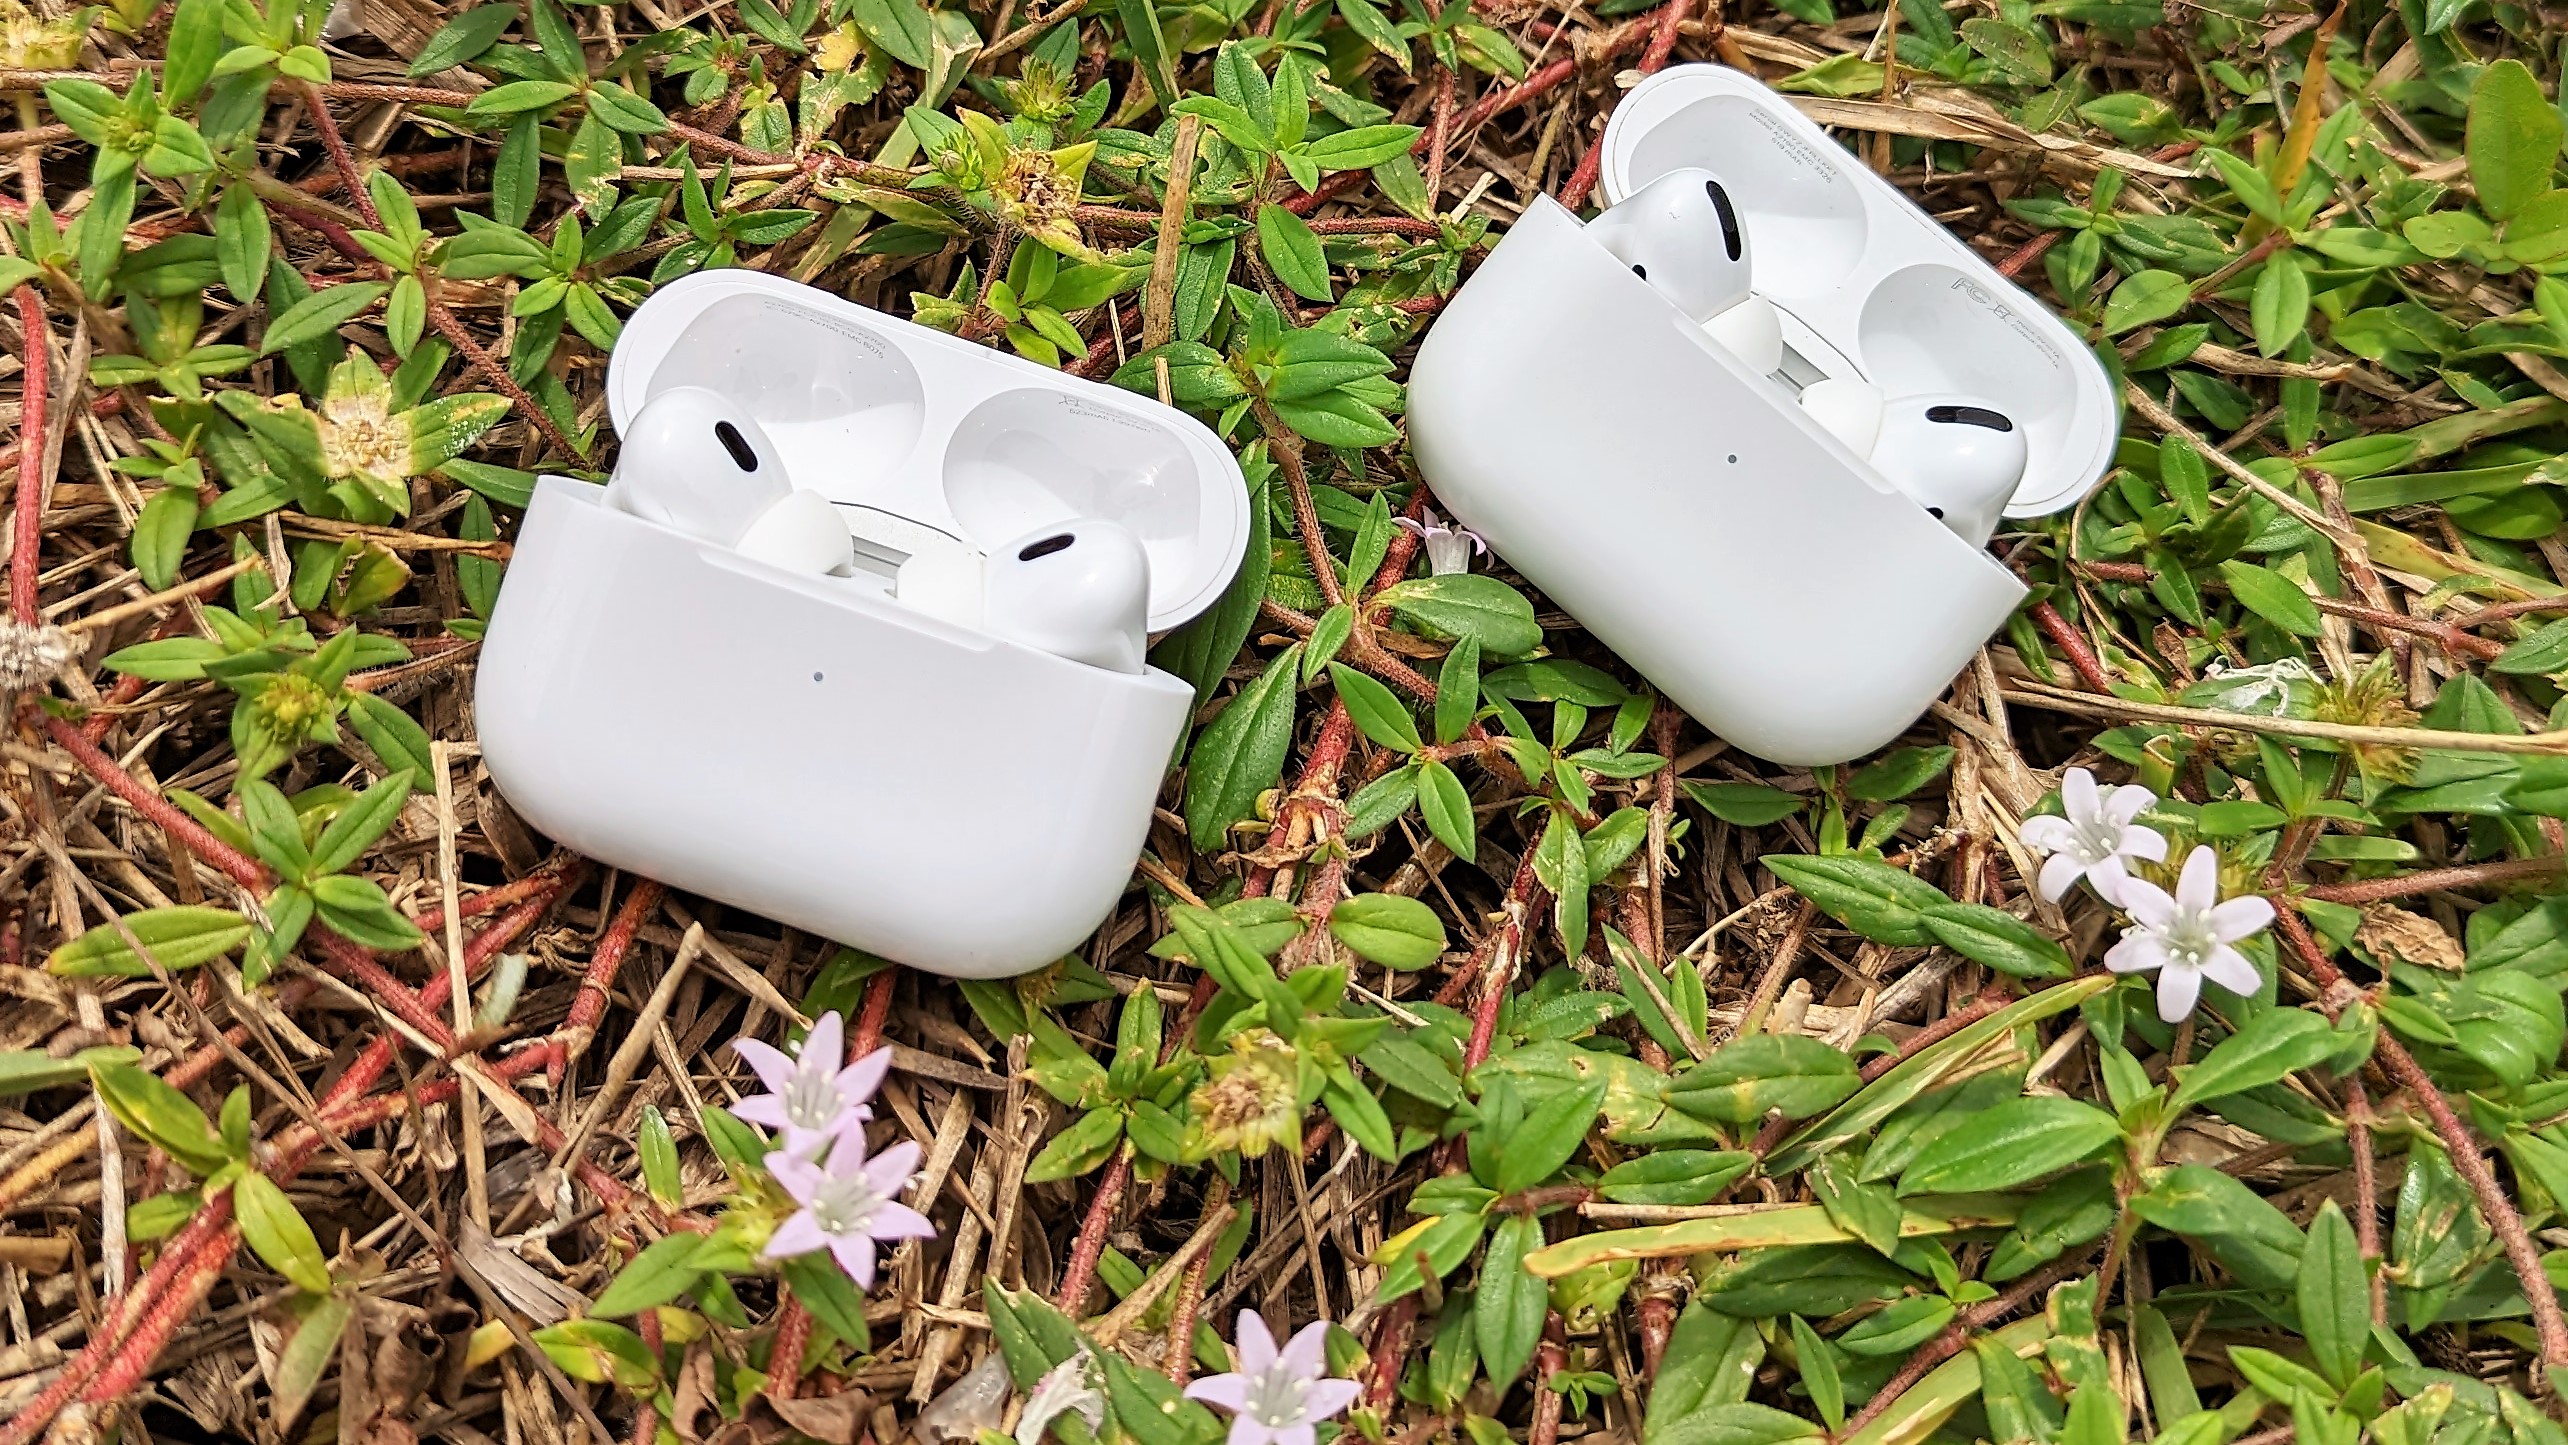 Apple's AirPods Pro 2 vs AirPods Pro: Price and features compared